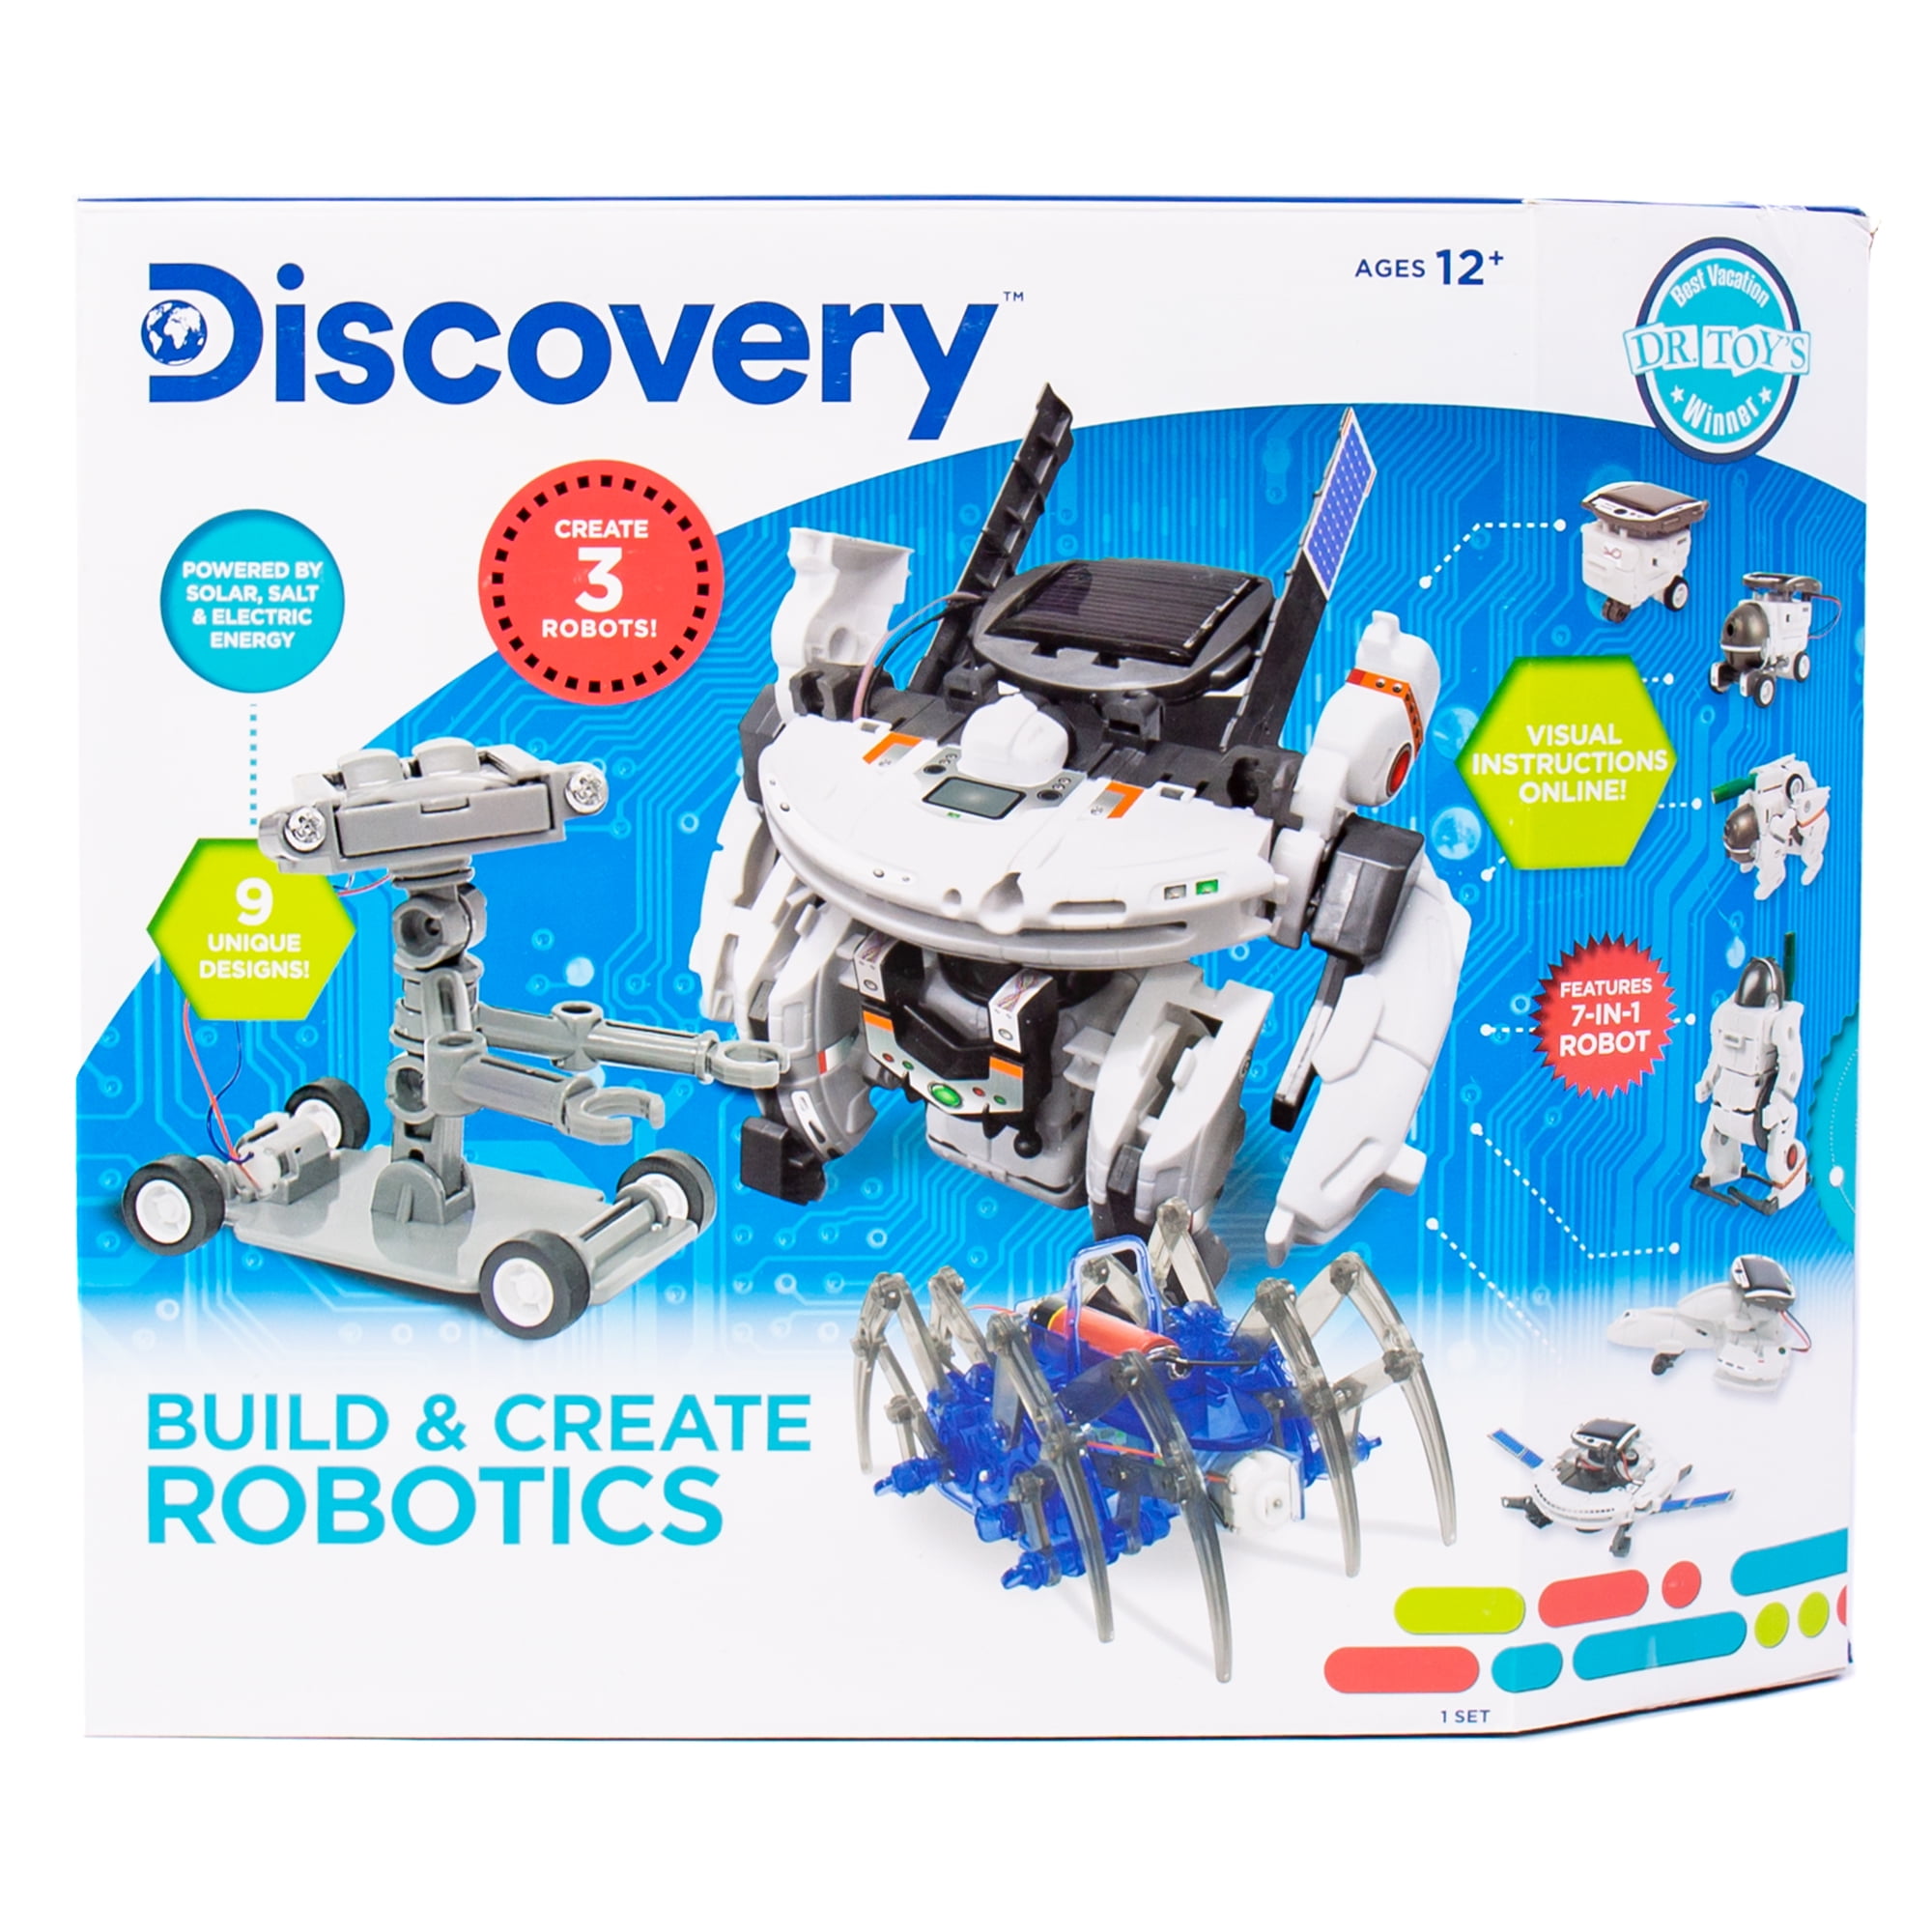 SPIDER ROBOT KIT Science Build it Play Gift Educational Toy Boy Robotic Electric 